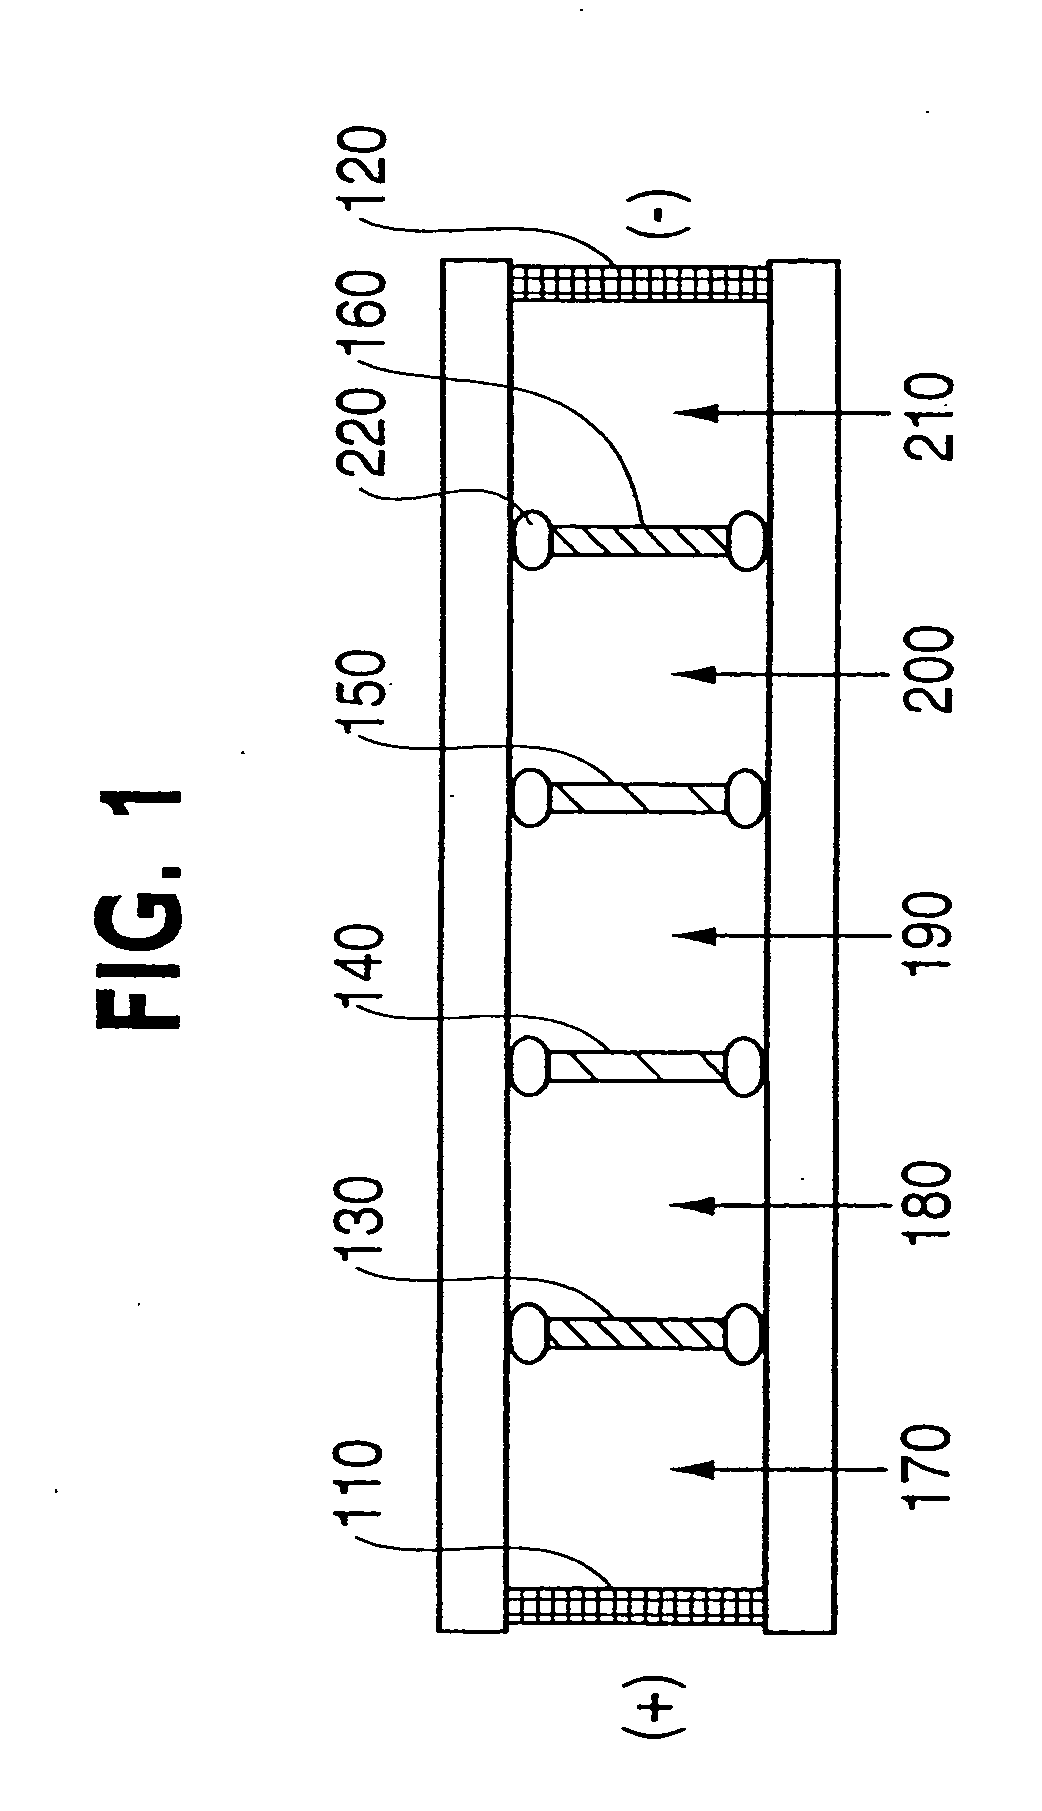 Method and device for separation of charged molecules by solution isoelectric focusing